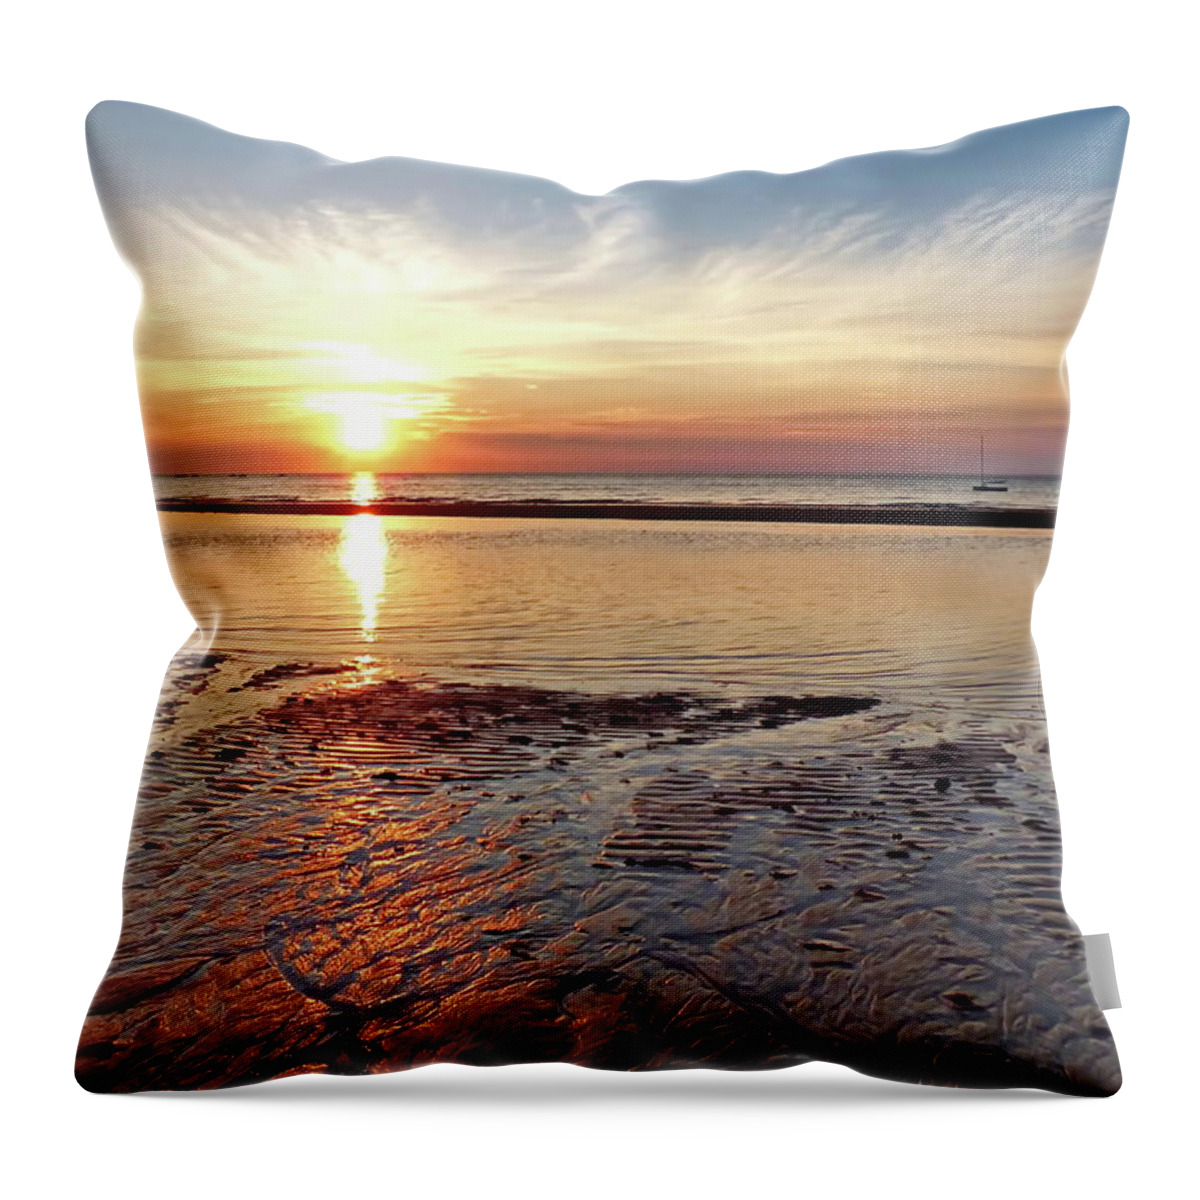 Sunset Throw Pillow featuring the photograph Low Tide at Sunset by Lyuba Filatova